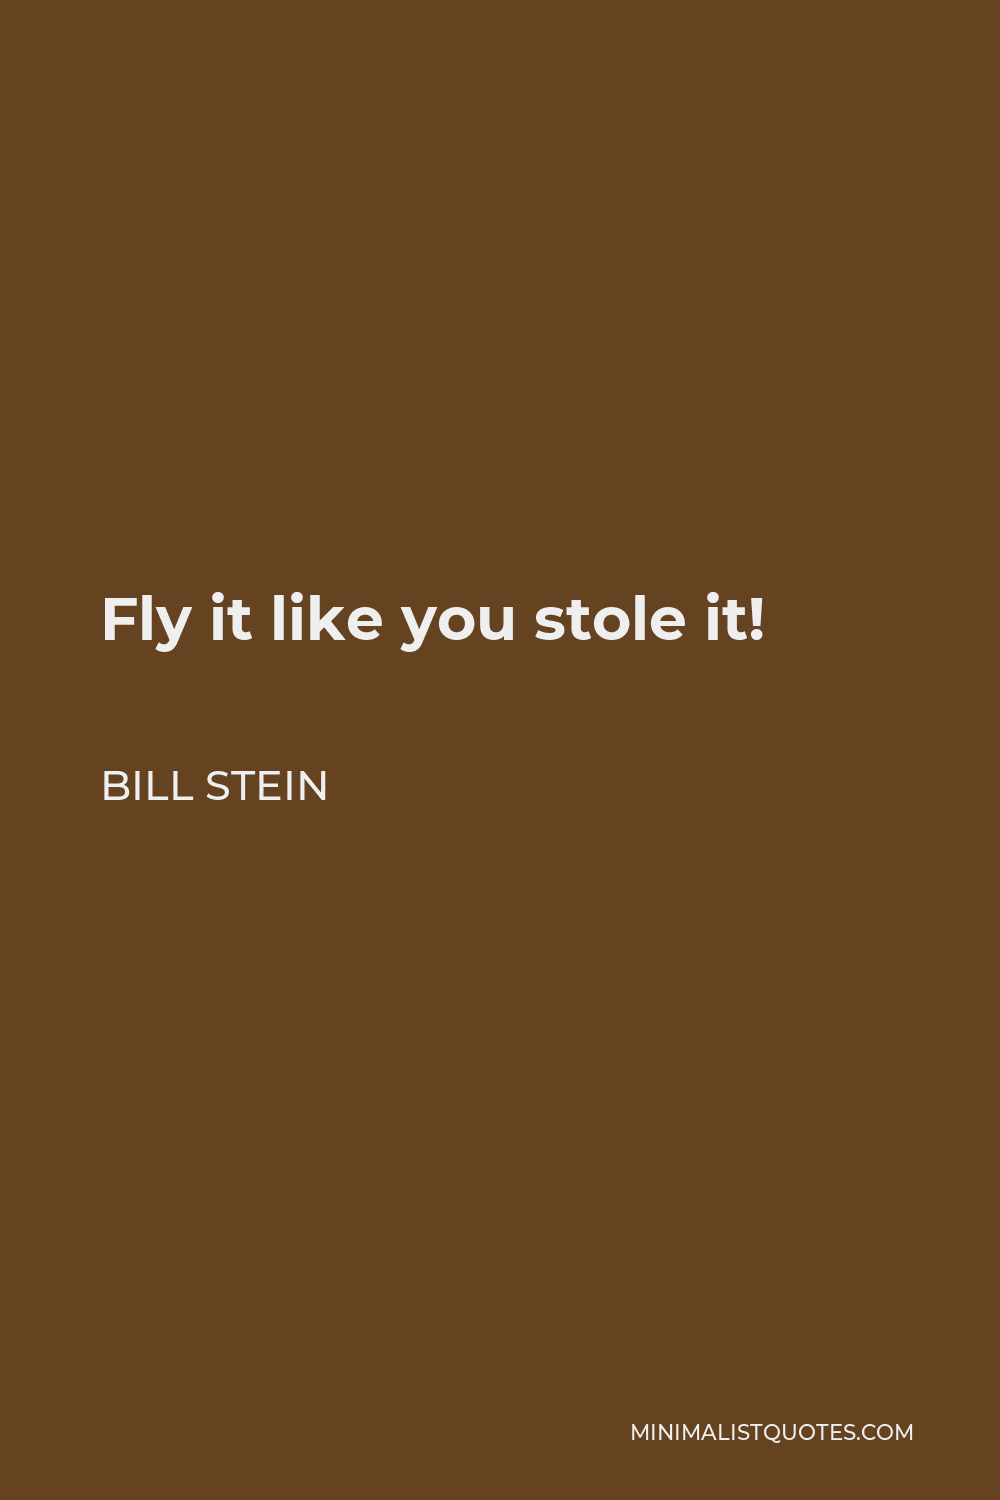 Bill Stein Quote - Fly it like you stole it!